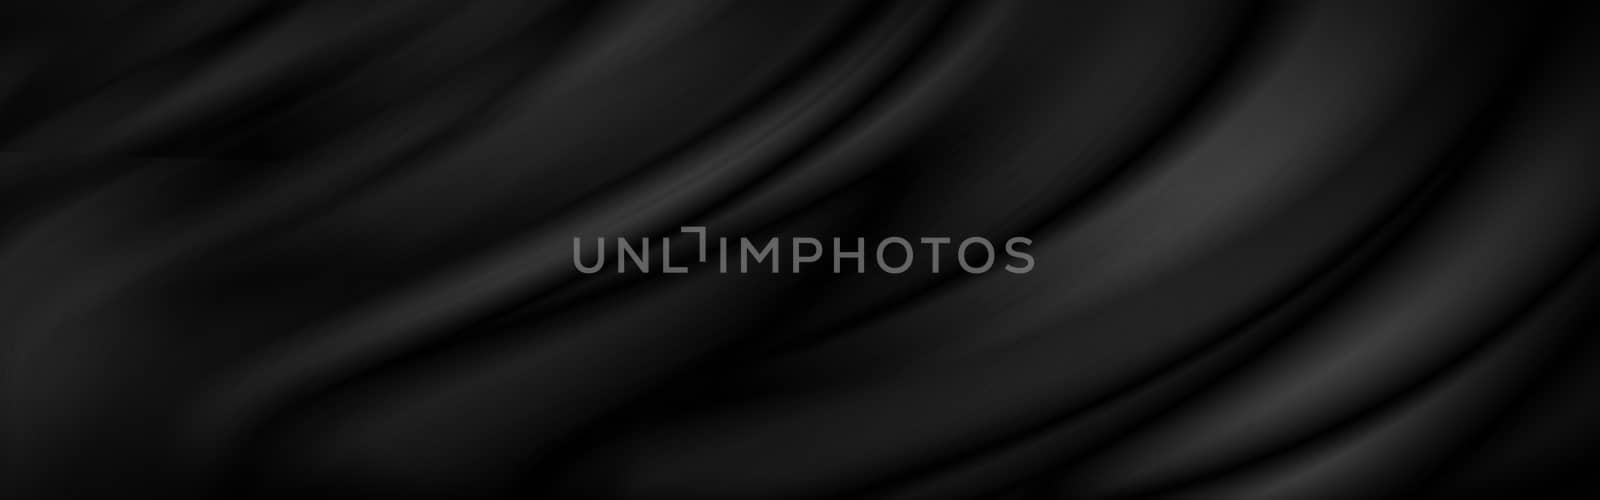 Black luxury fabric background with copy space